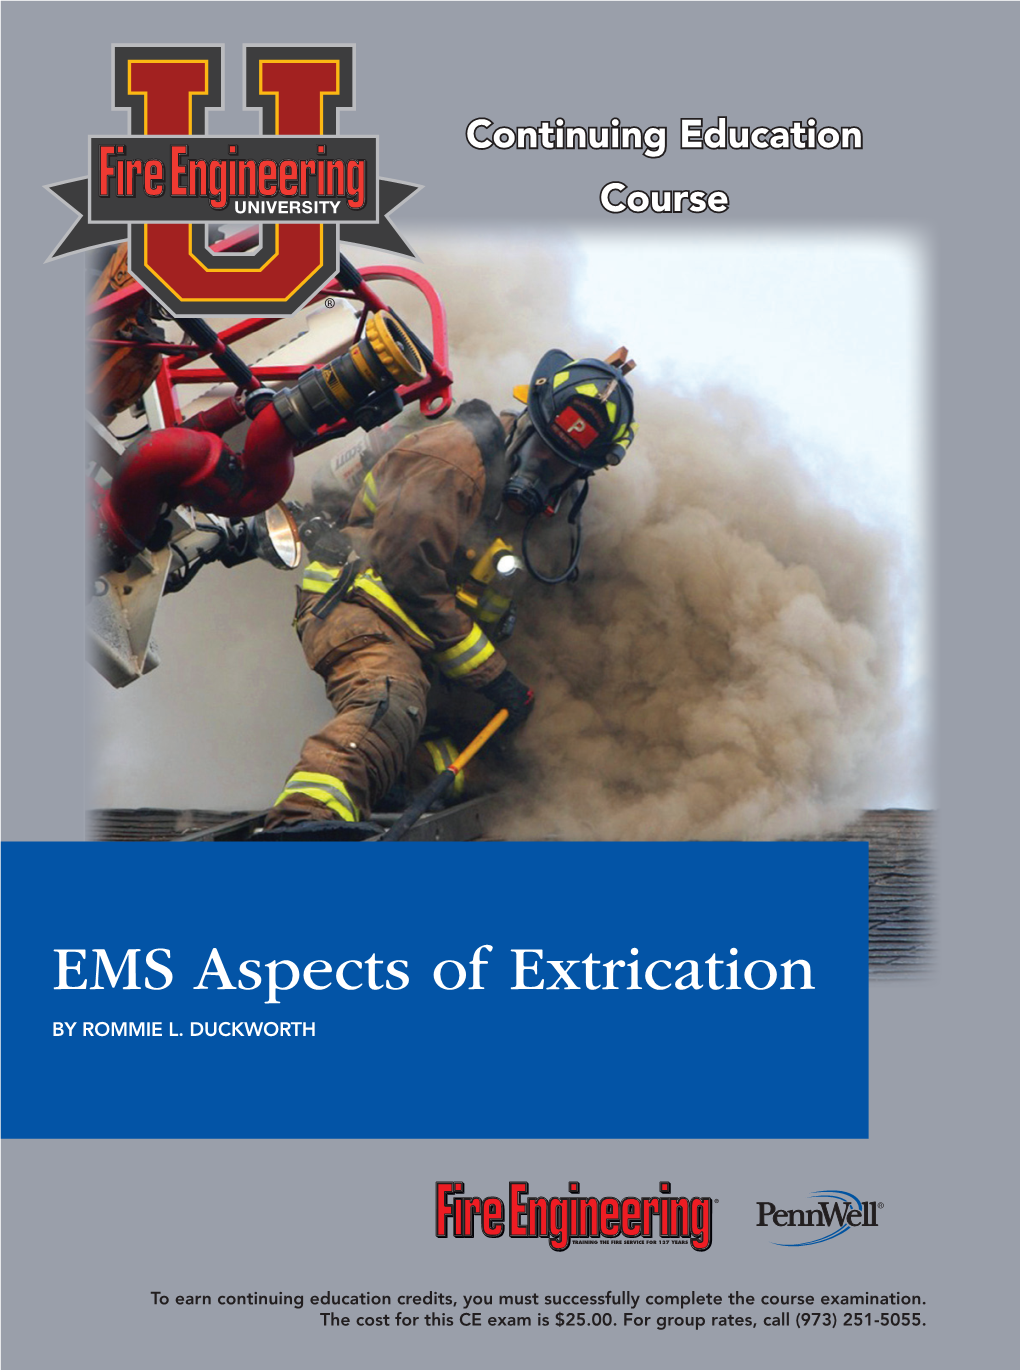 EMS Aspects of Extrication by Rommie L